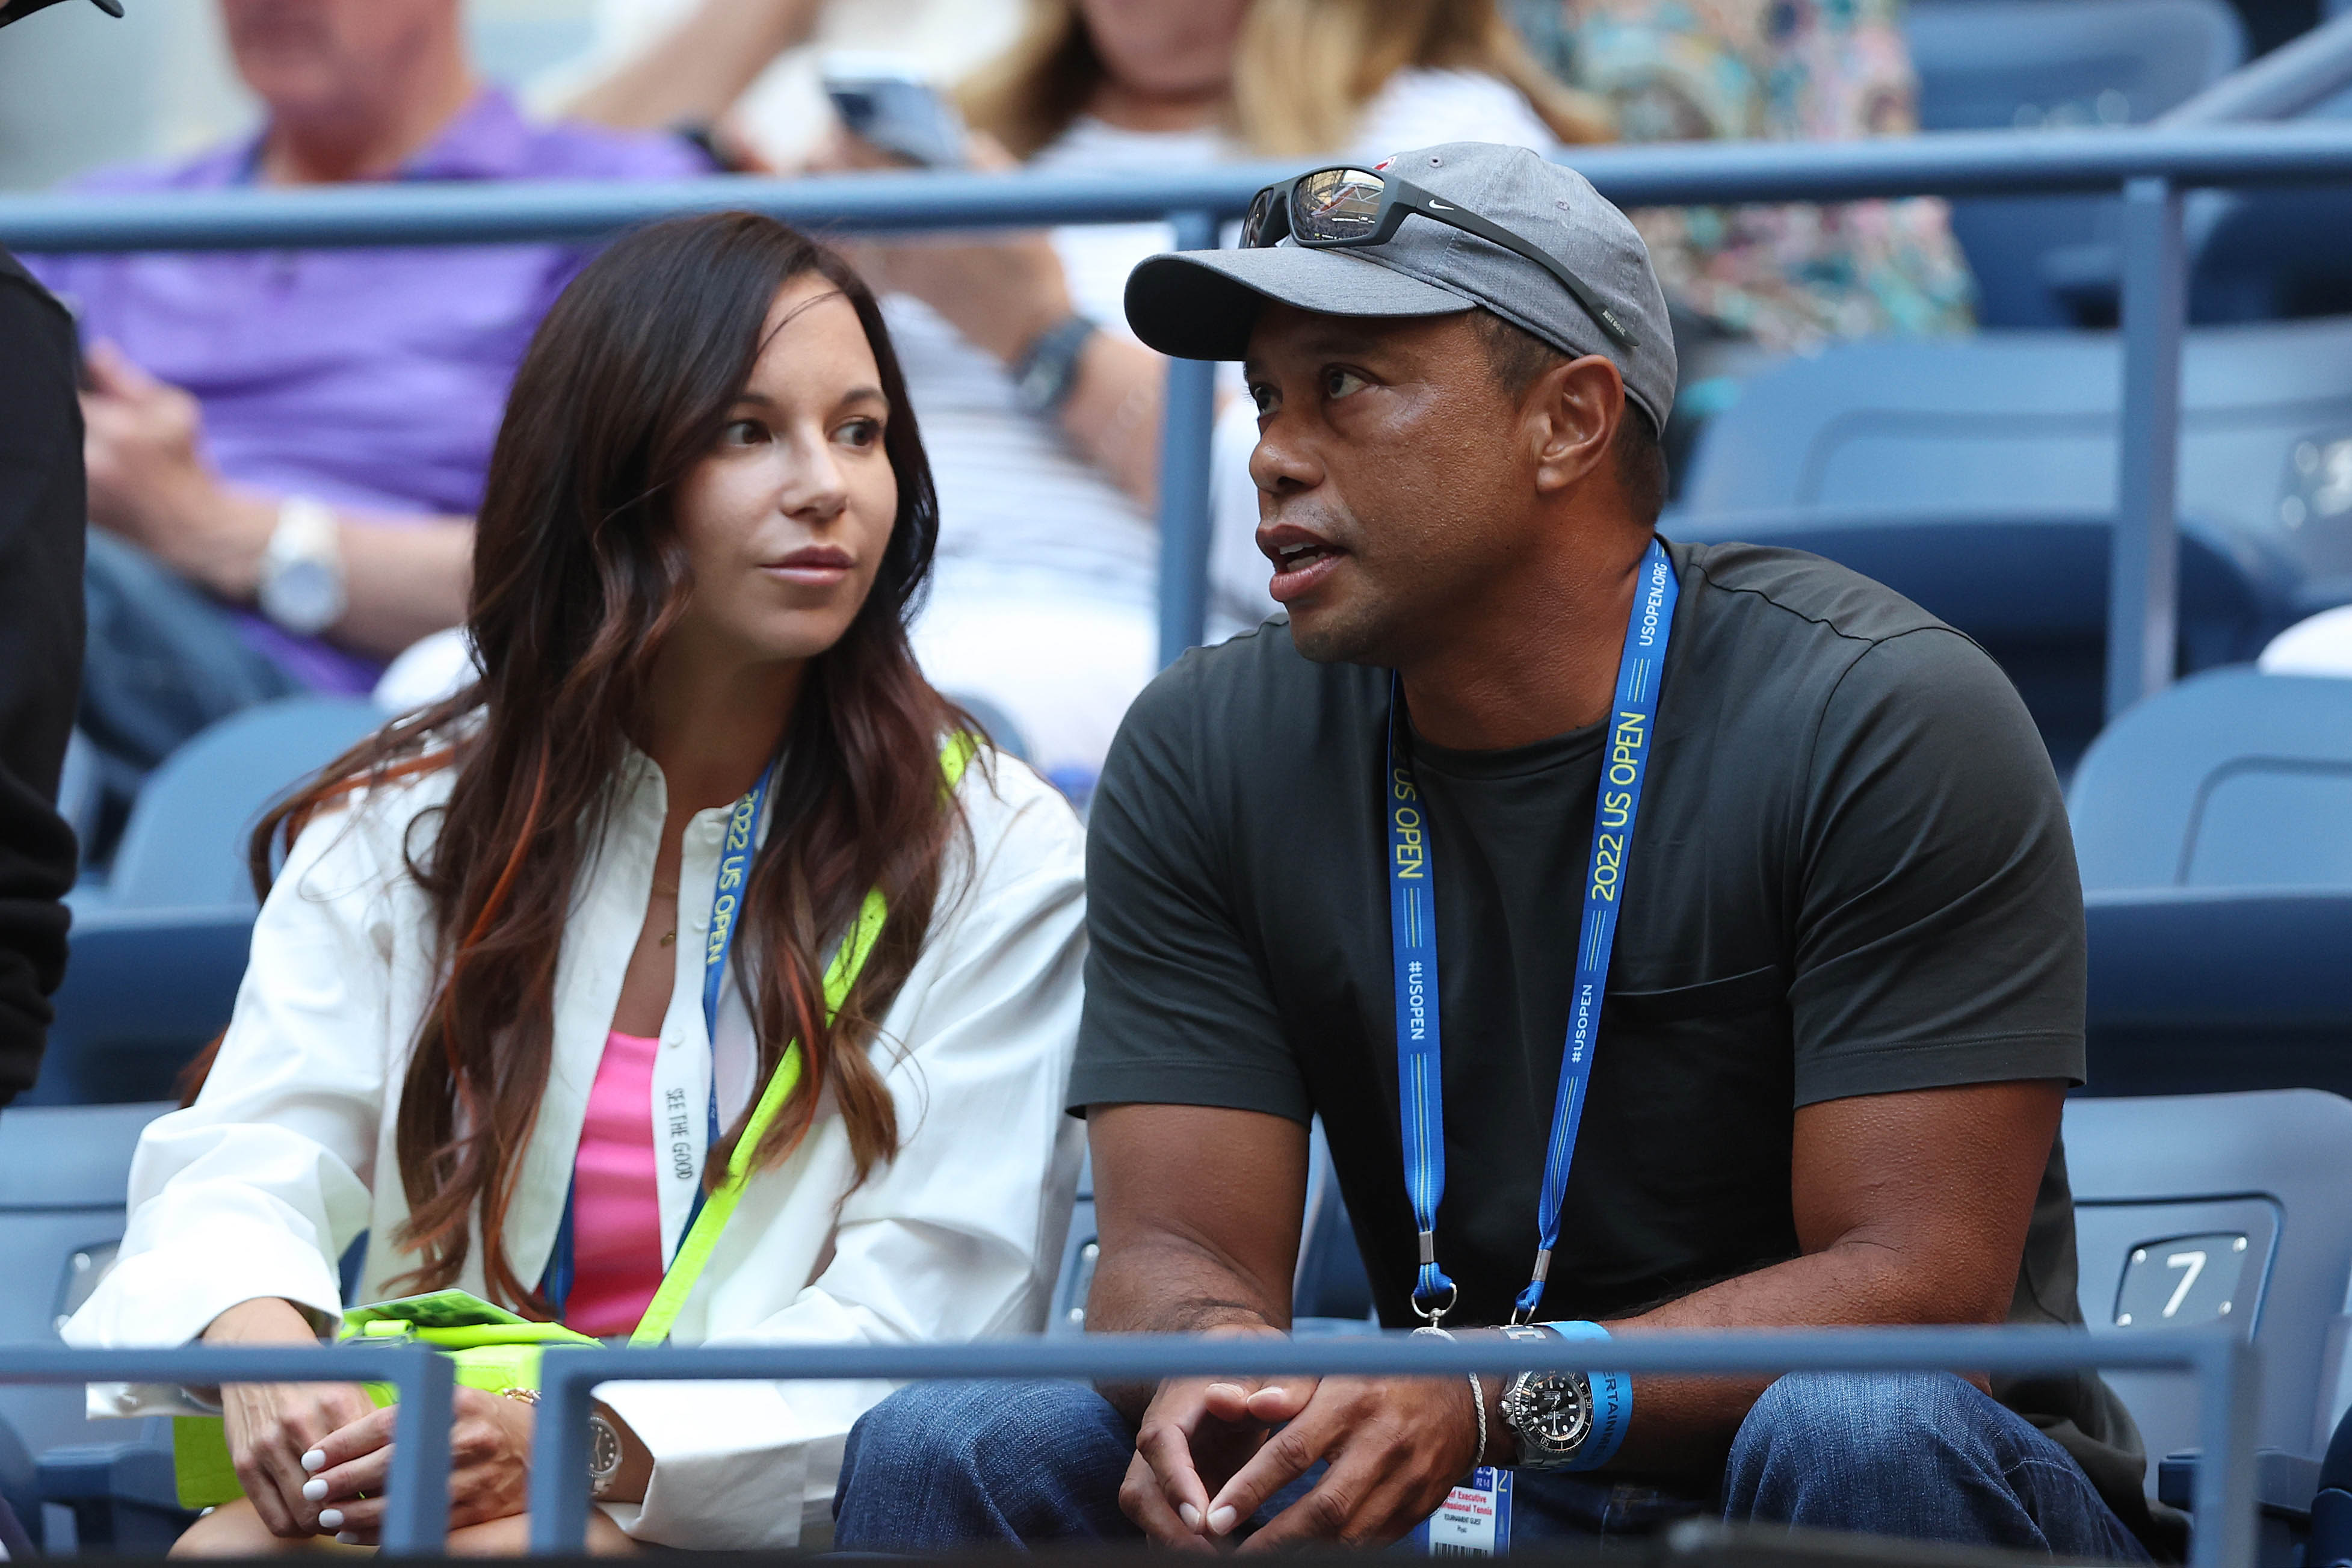 Erica Herman and Tiger Woods look on prior to a match at the 2022 US Open at USTA Billie Jean King National Tennis Center on August 31, 2022 in Queens, New York City. 